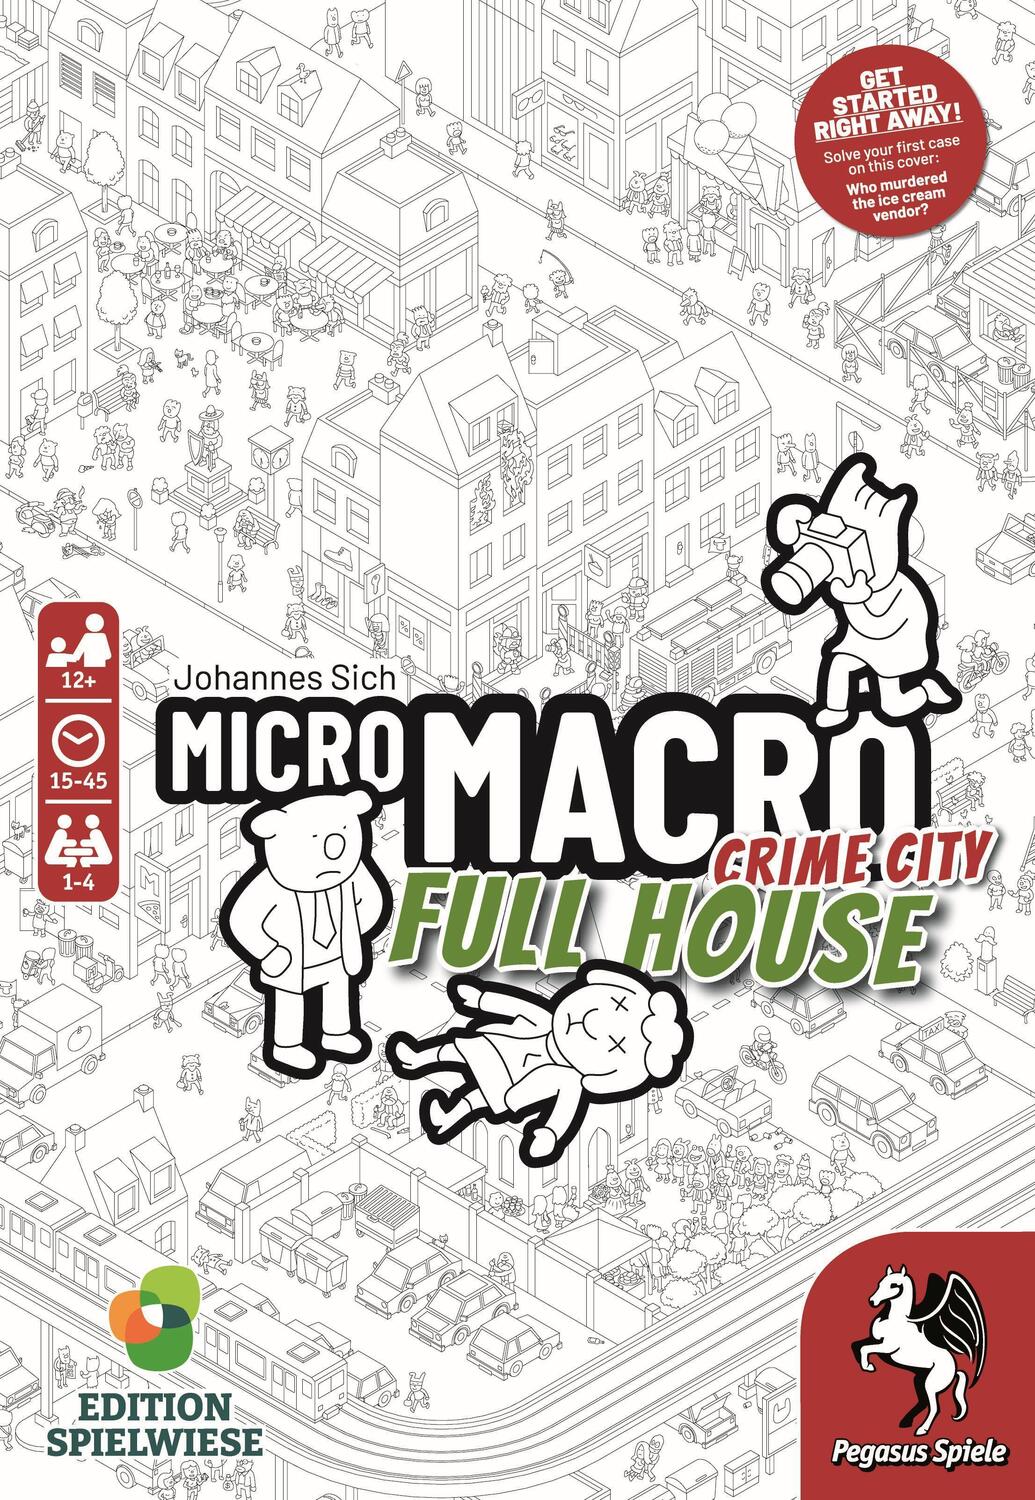 Bild: 4250231730153 | MicroMacro: Crime City 2 - Full House (Edition Spielwiese) (English...